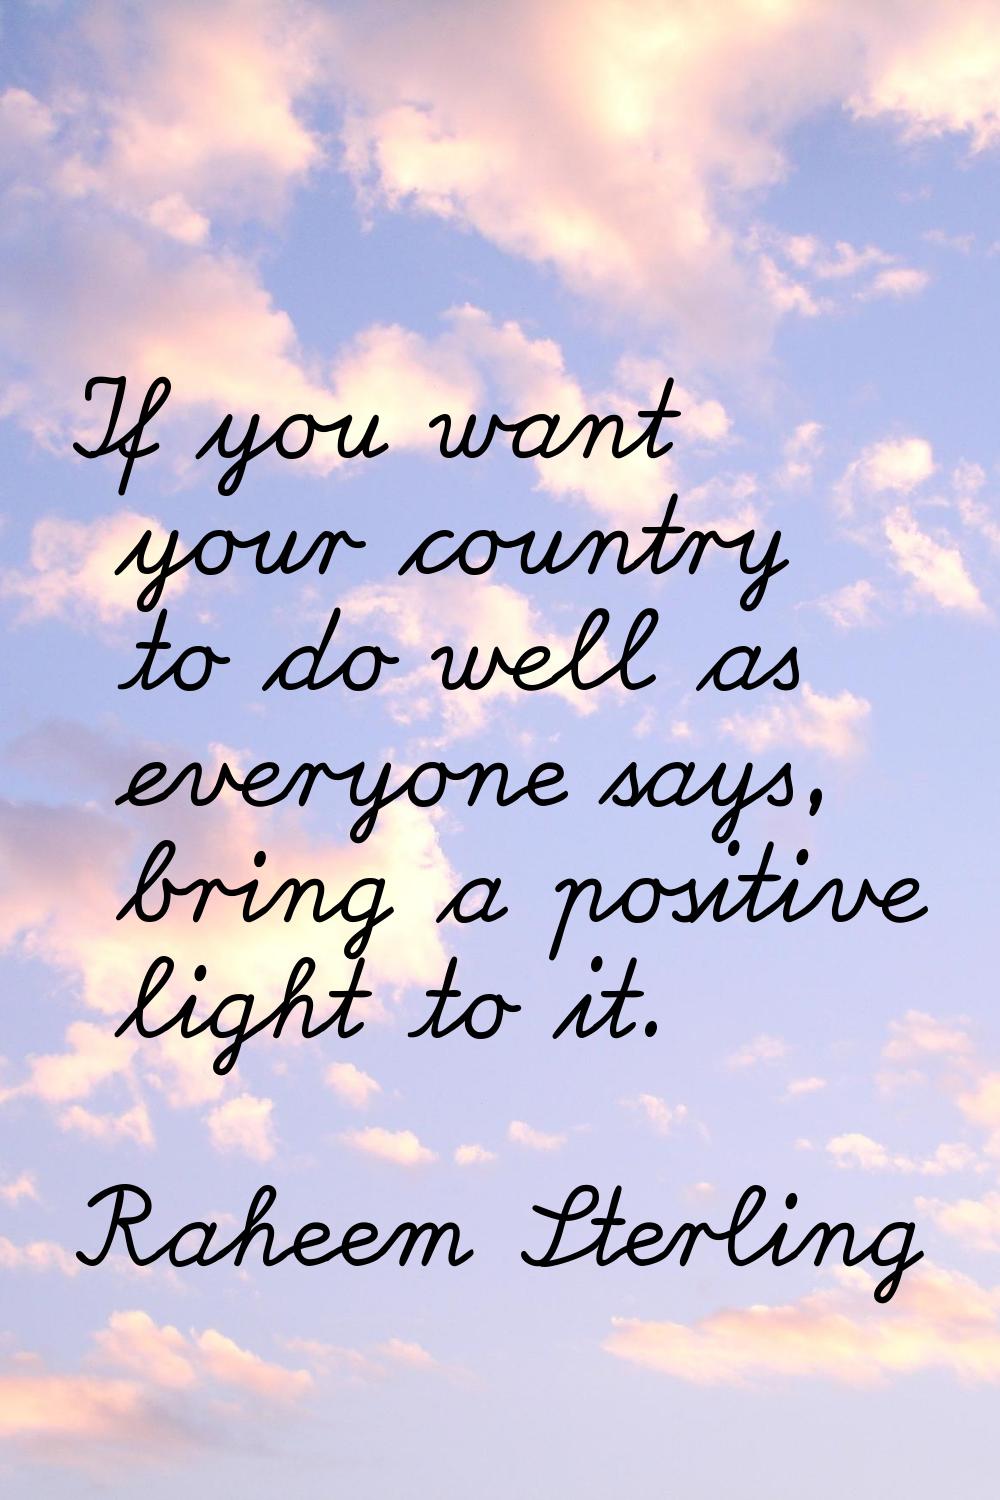 If you want your country to do well as everyone says, bring a positive light to it.